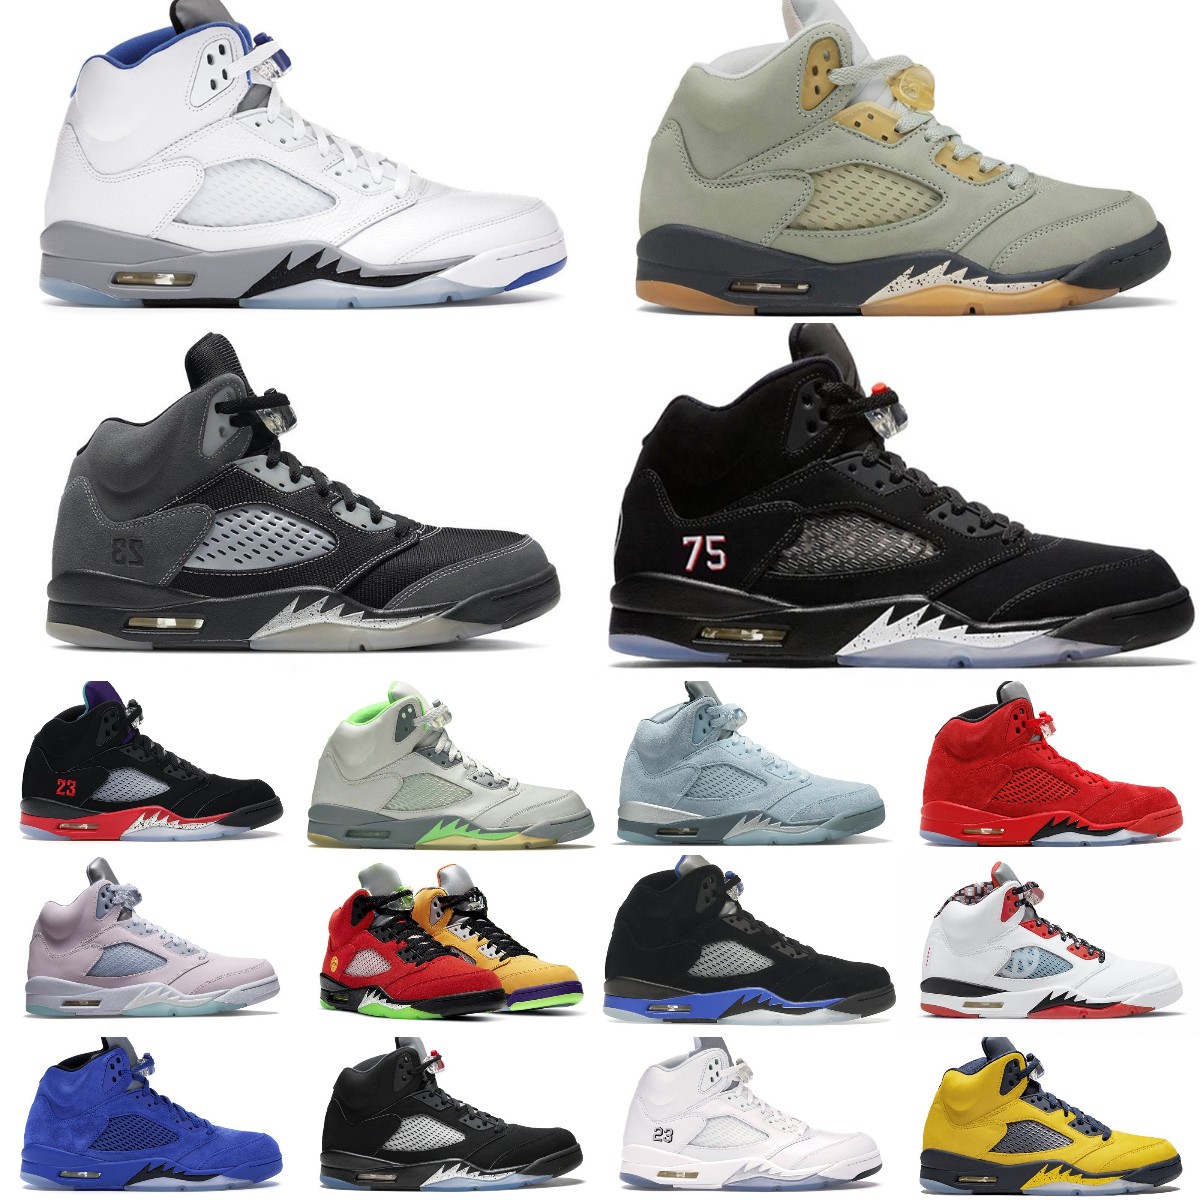 NEW Jumpman 5 Retro Basketball Shoes Men 5s Green Bean Dark Concord Racer Blue Raging Bull Red Suede Jade Horizon Sail What The Easter Mens Trainers Sports Sneakers